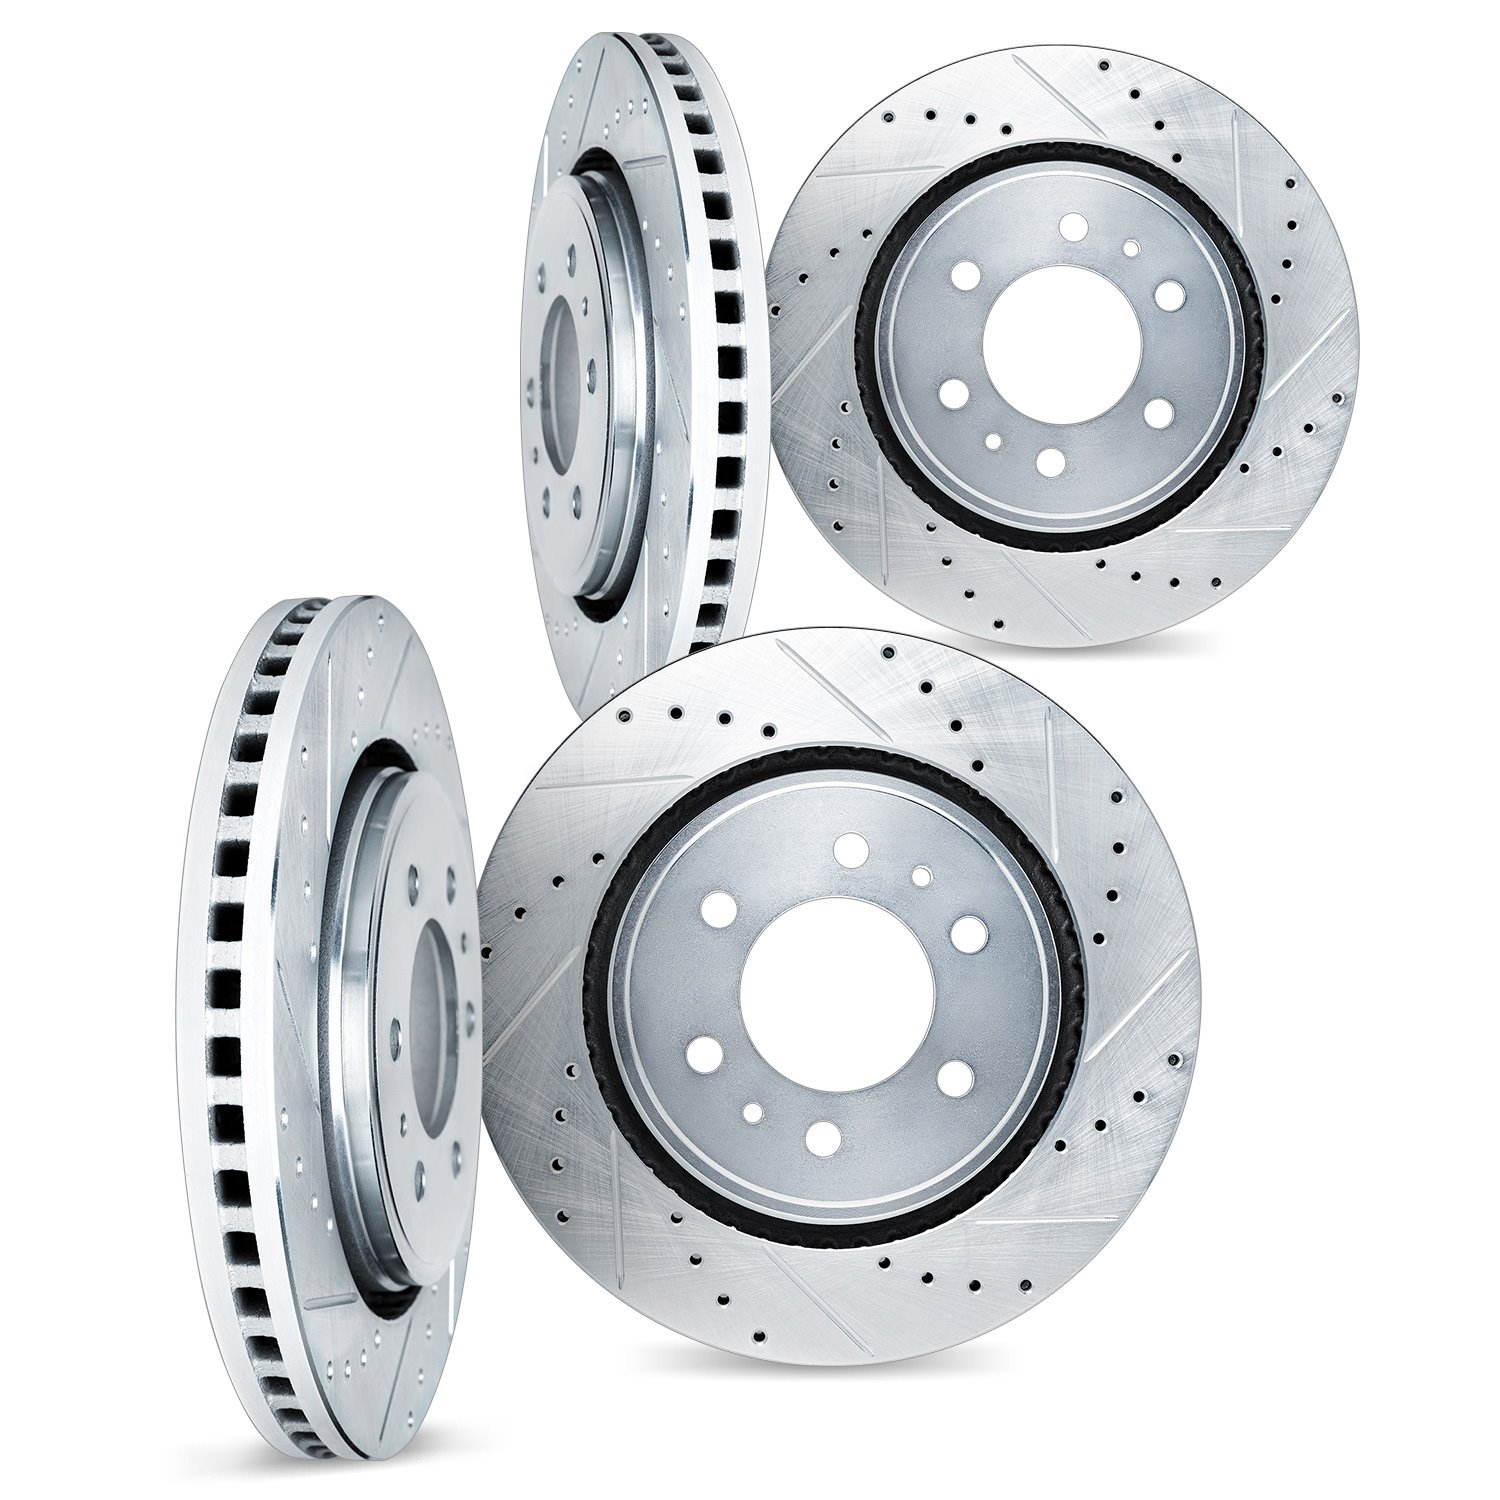 7004-54377 Drilled/Slotted Brake Rotors [Silver], Fits Select Ford/Lincoln/Mercury/Mazda, Position: Front and Rear